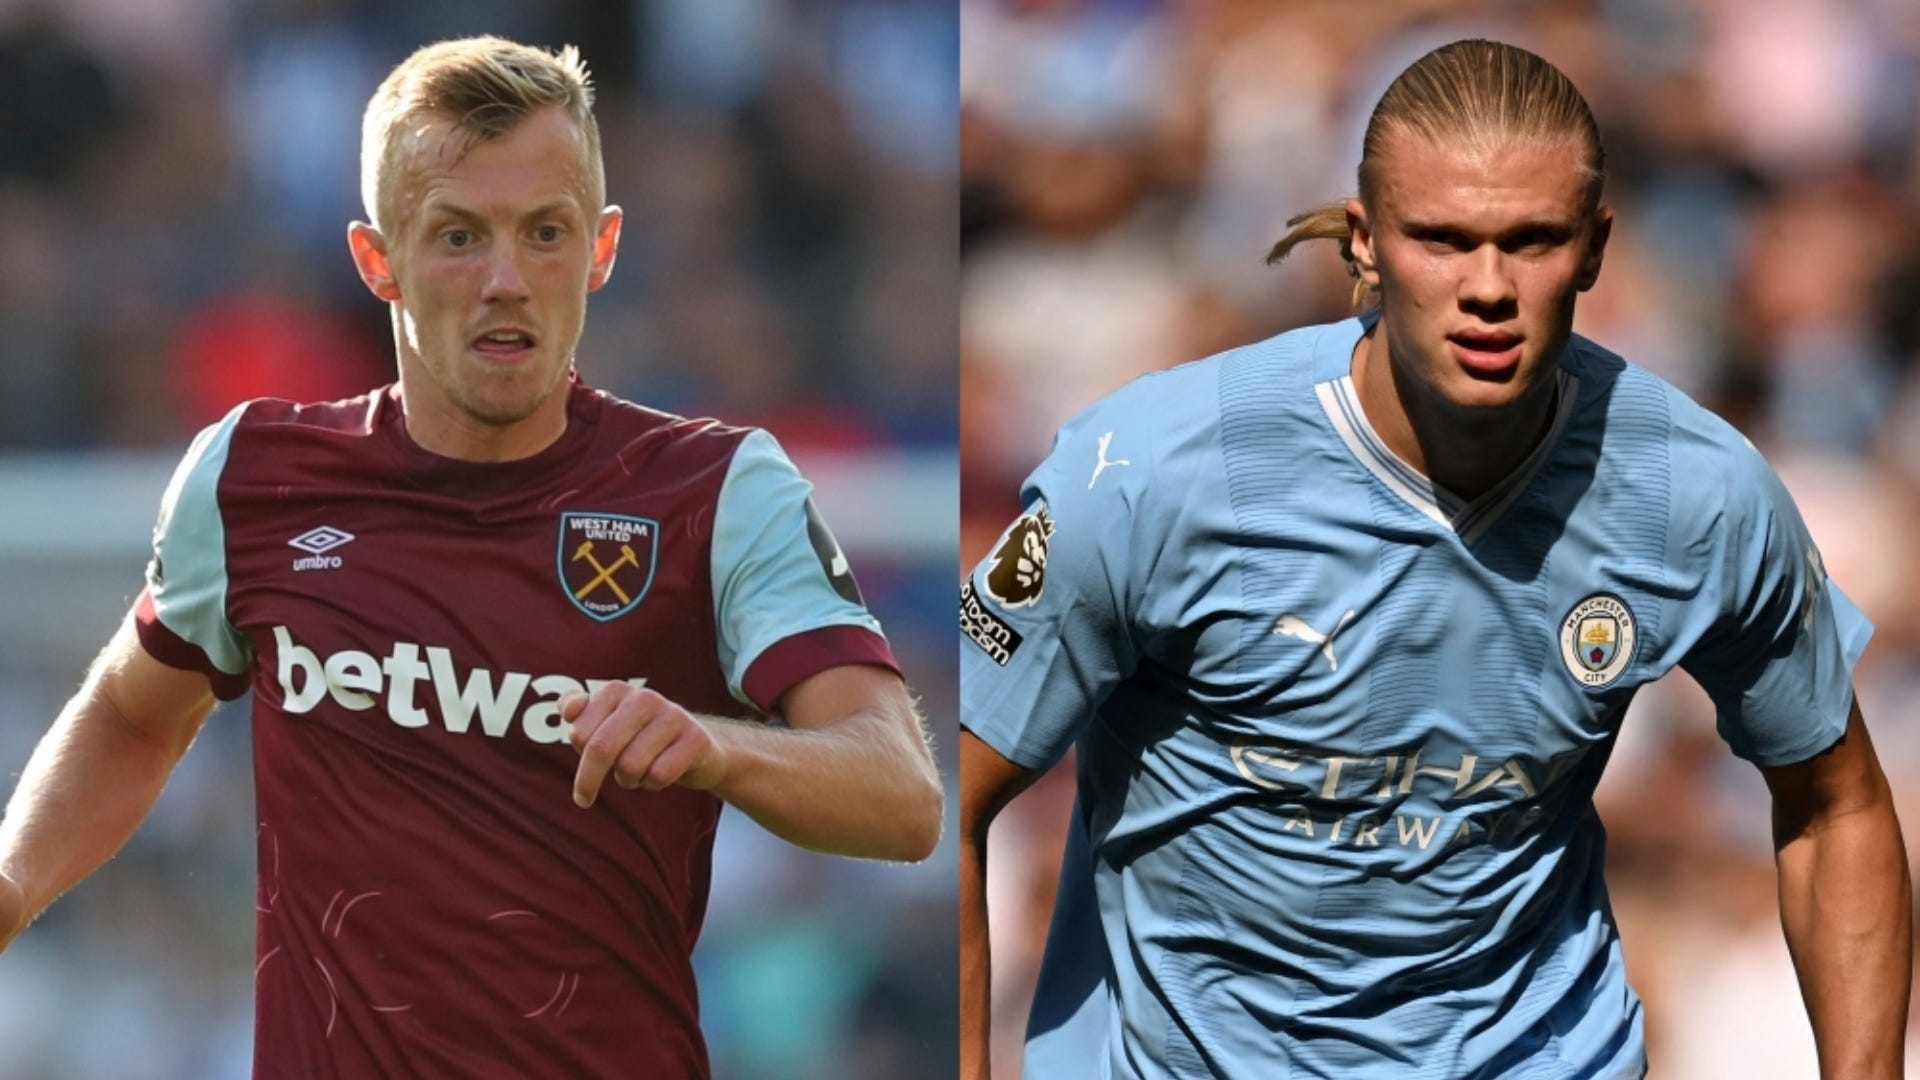 West Ham vs Man City Where to watch the match online, live stream, TV channels, and kick-off time Goal UK